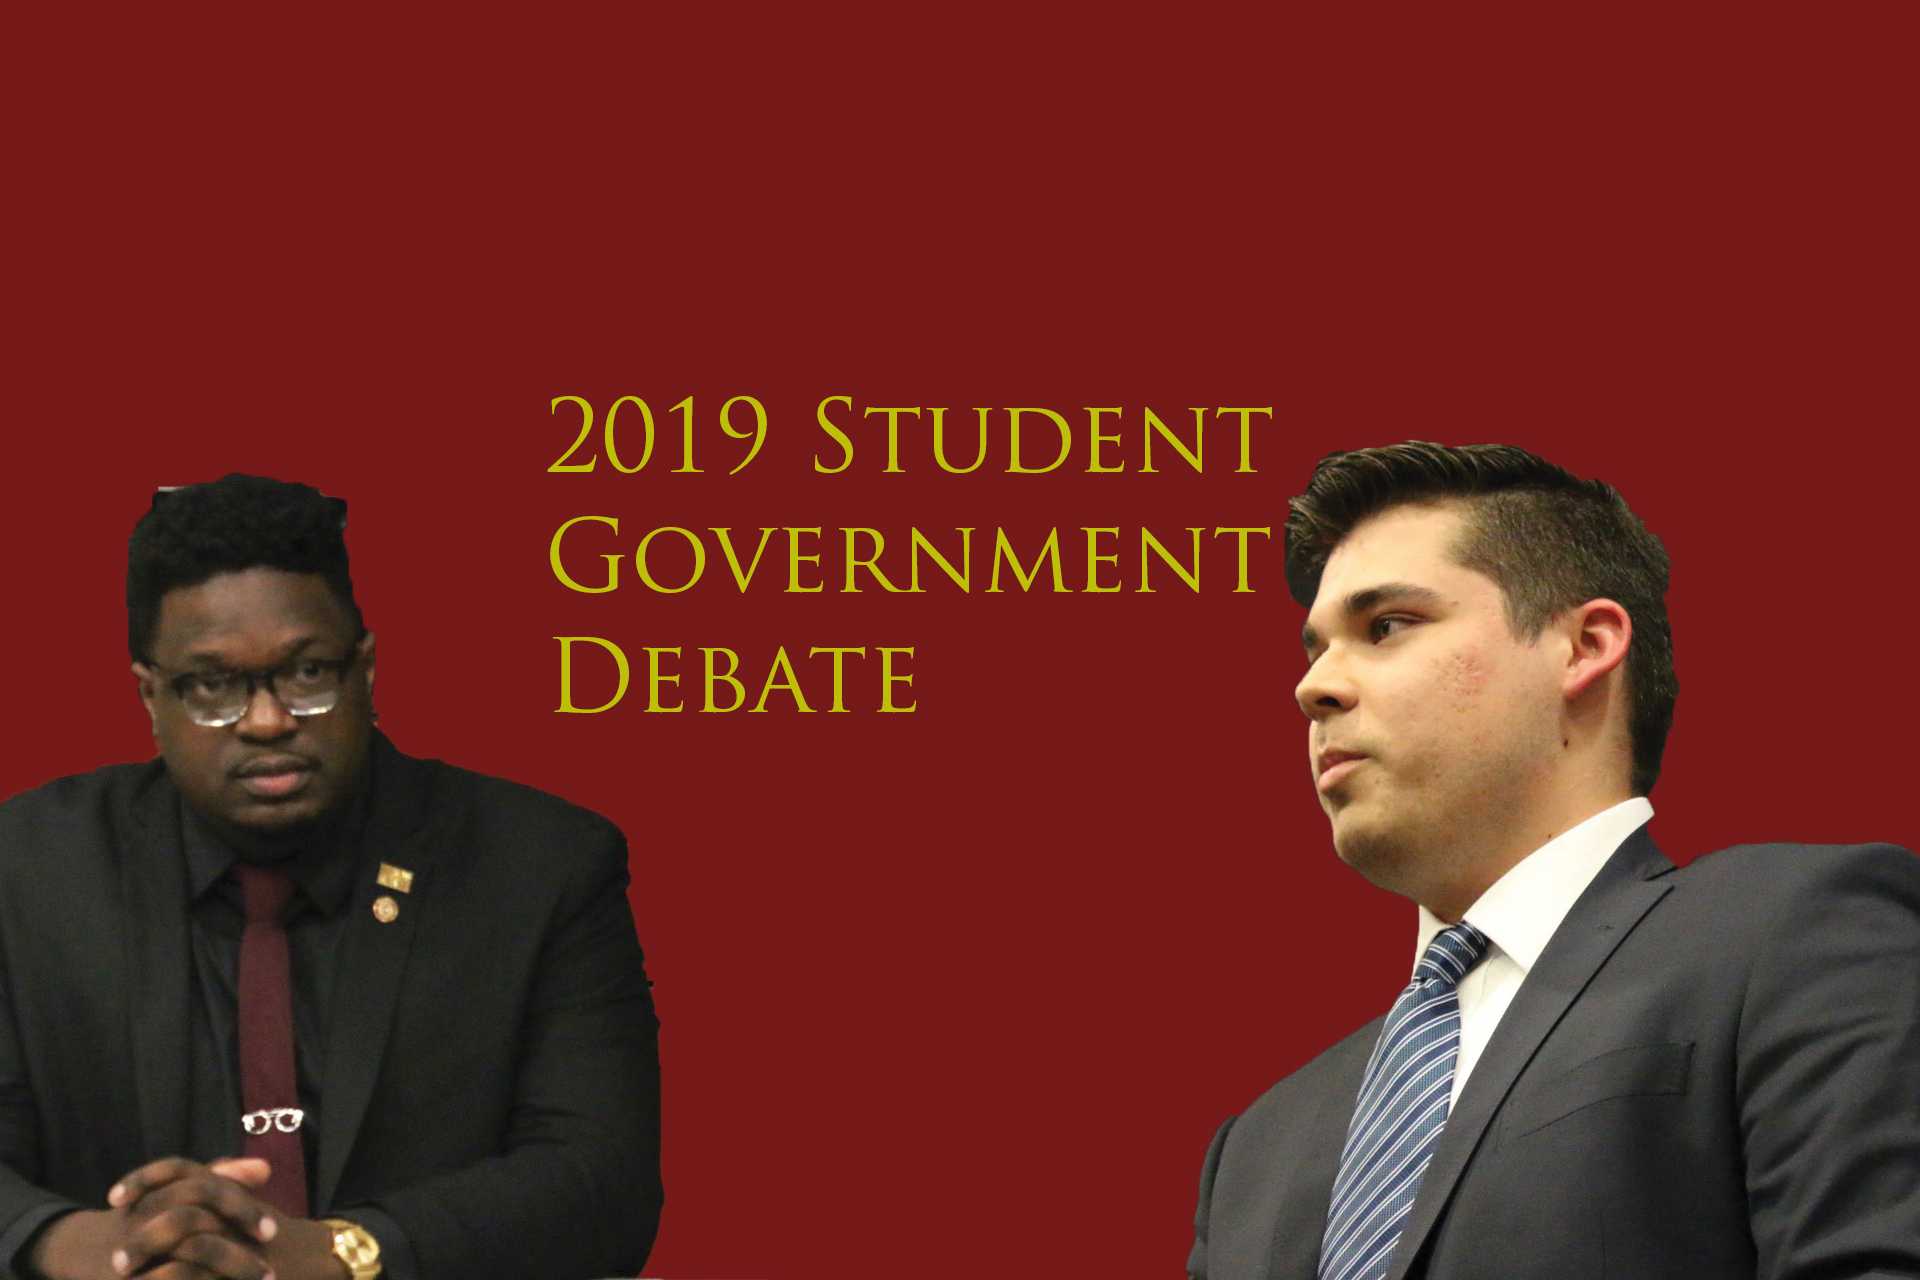 Presidential+candidates+present+platforms+during+Student+Government+debate